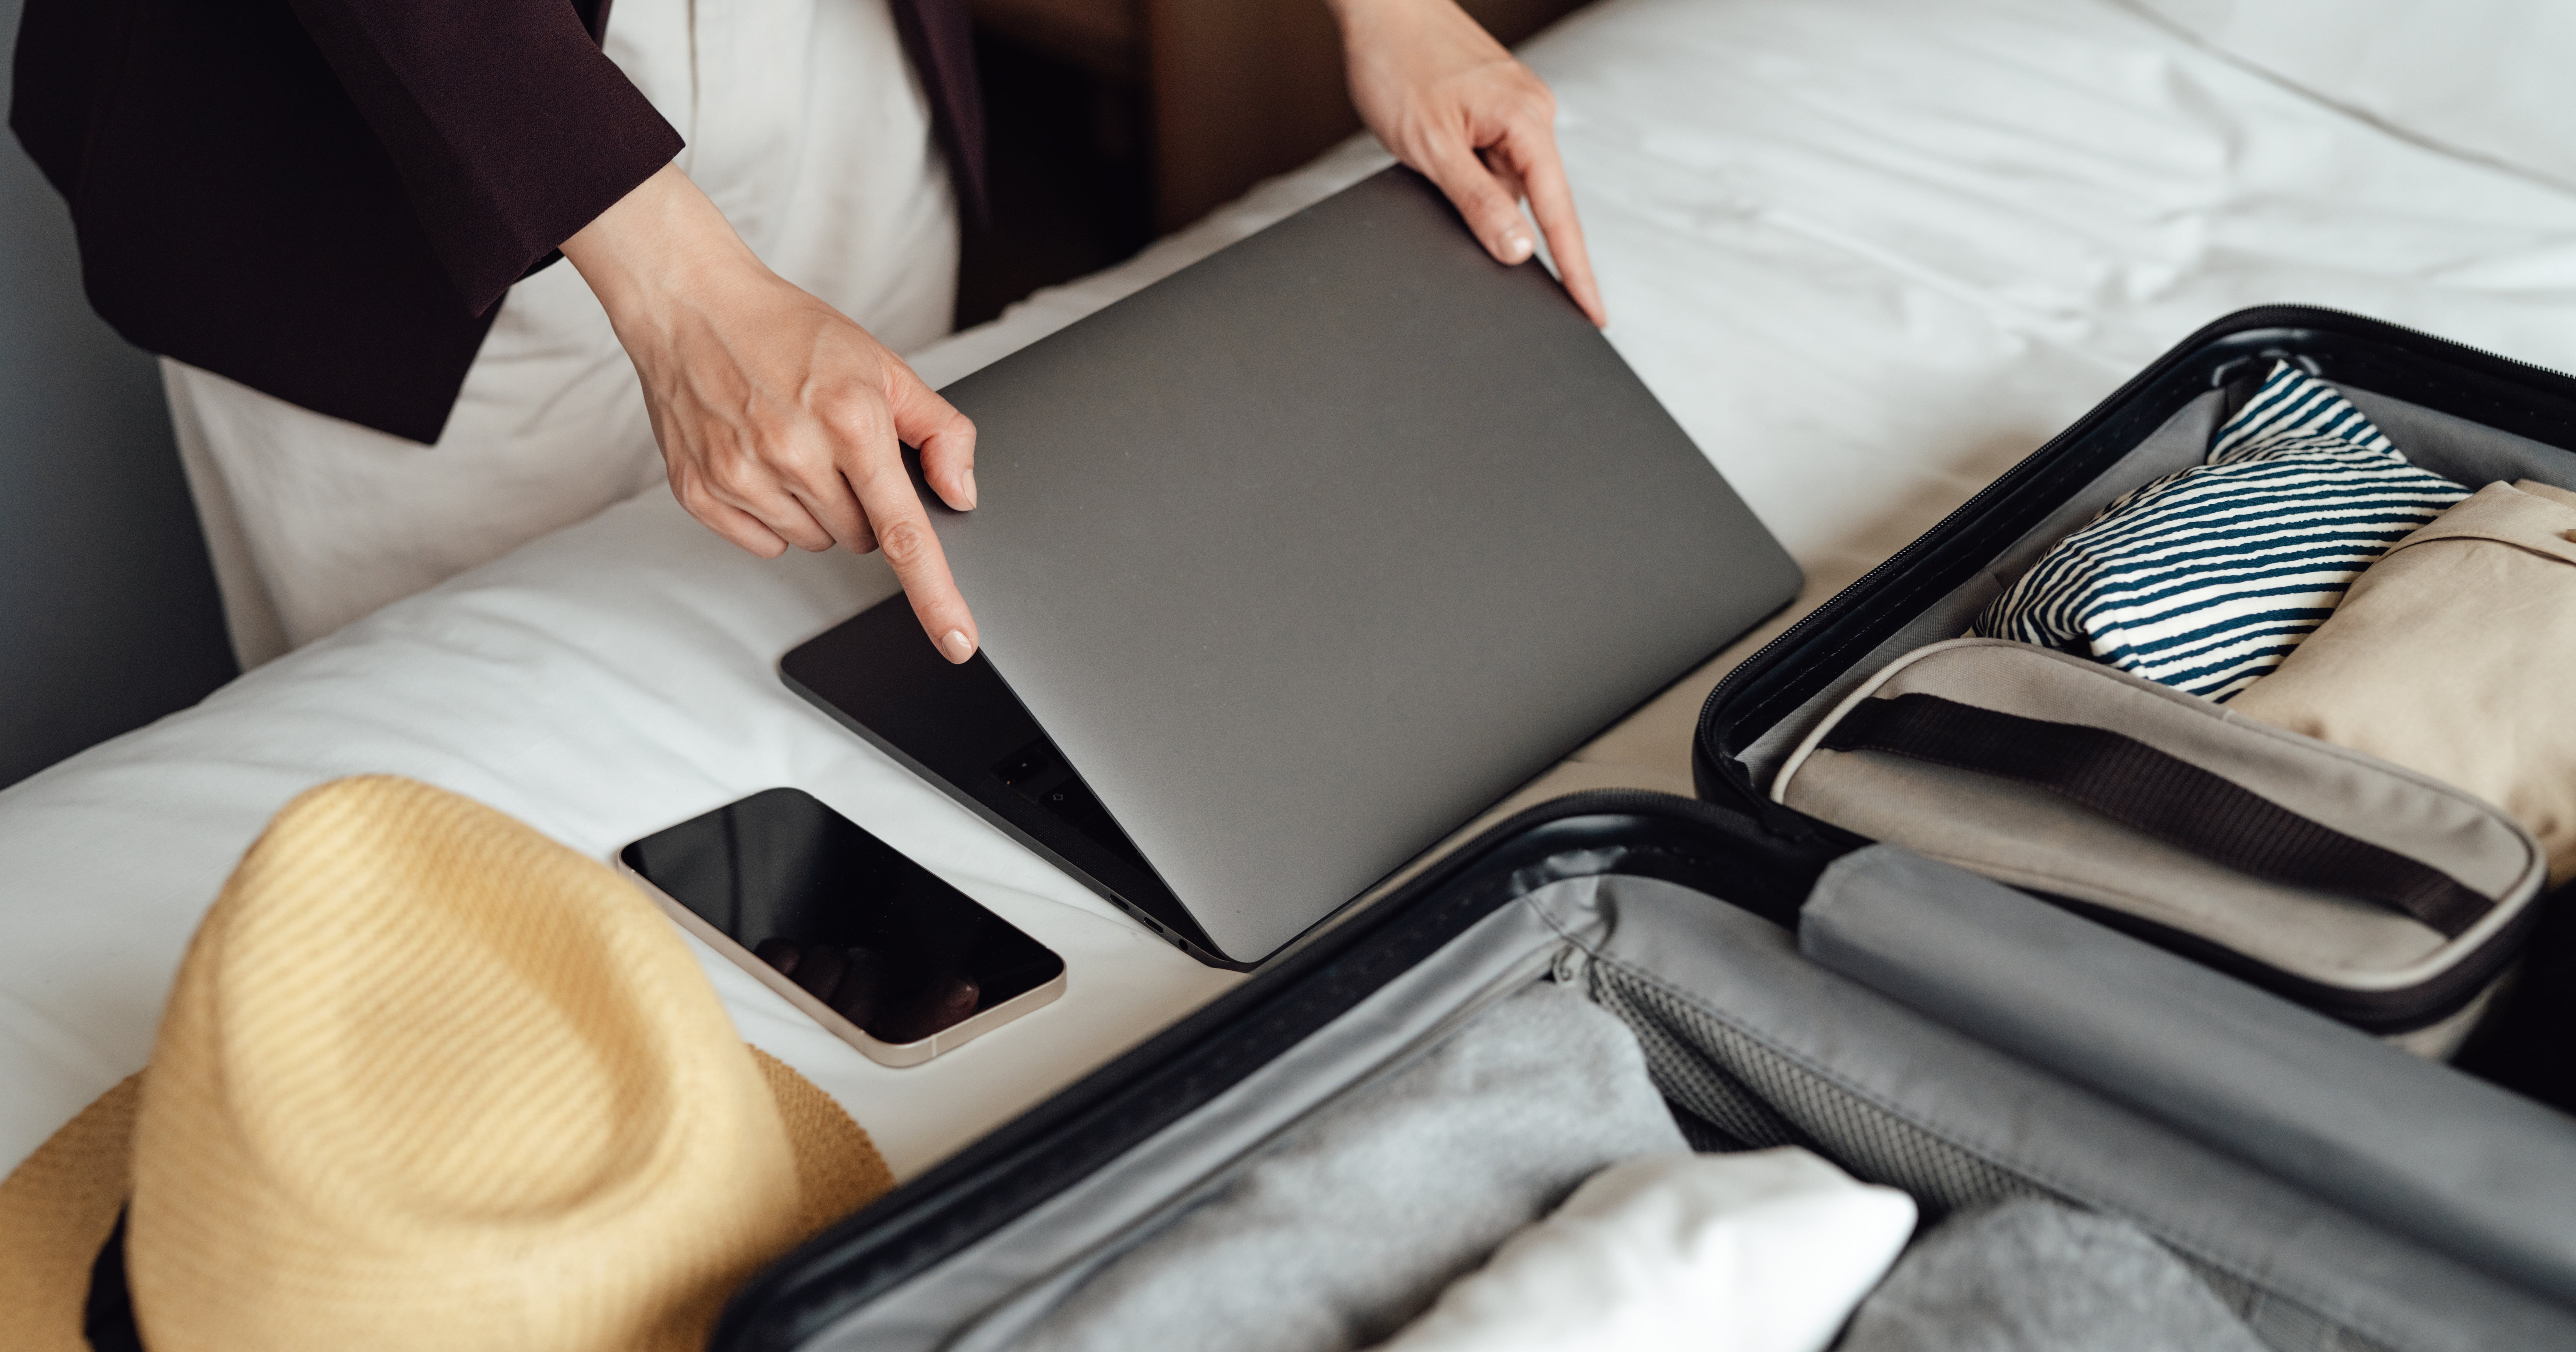 These Packing Cubes Helped Me Stay Organized on a Trip Abroad